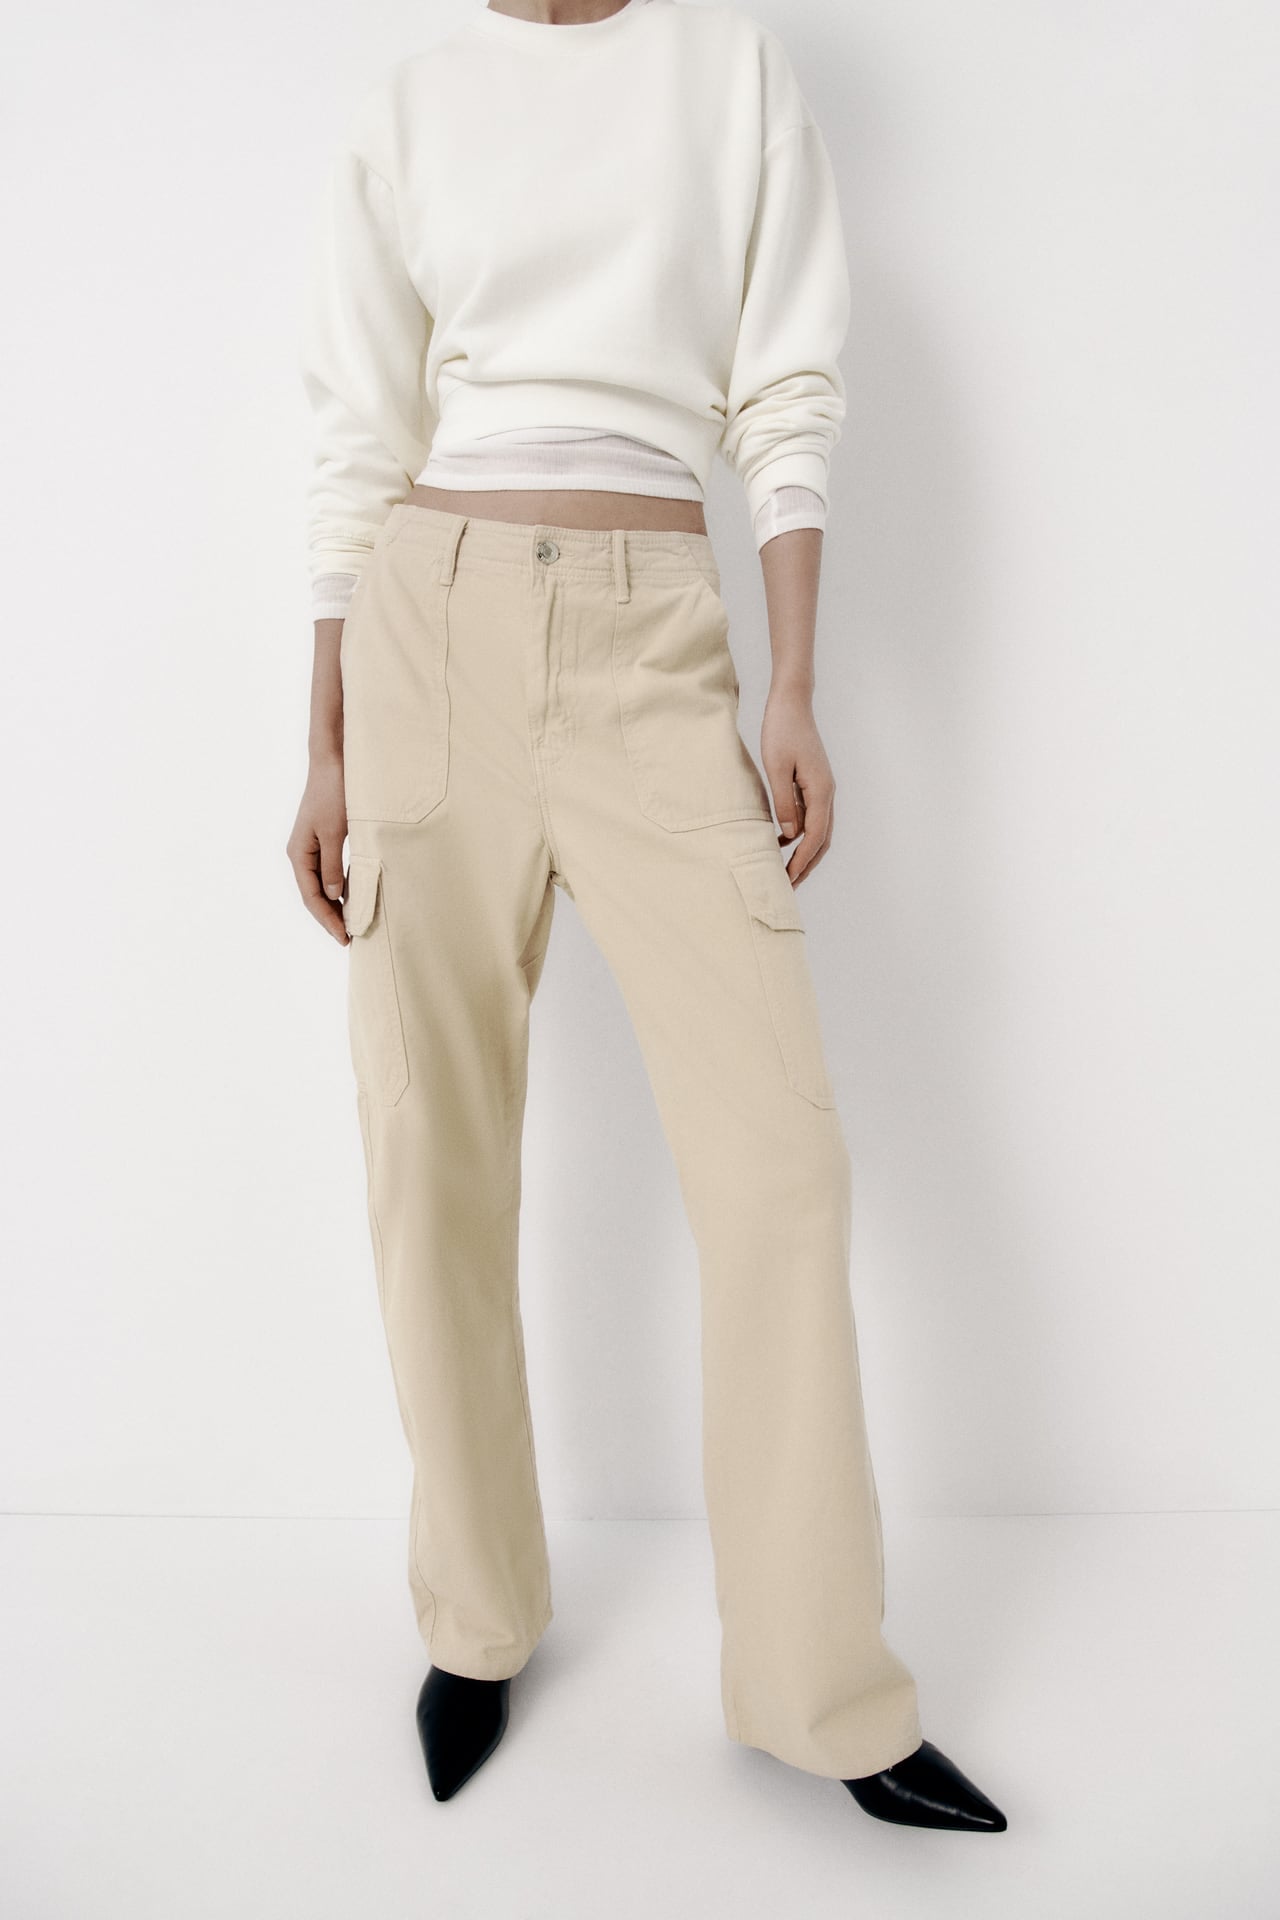 31 Special Zara Basics I'd Wear Throughout 2021 in 2023